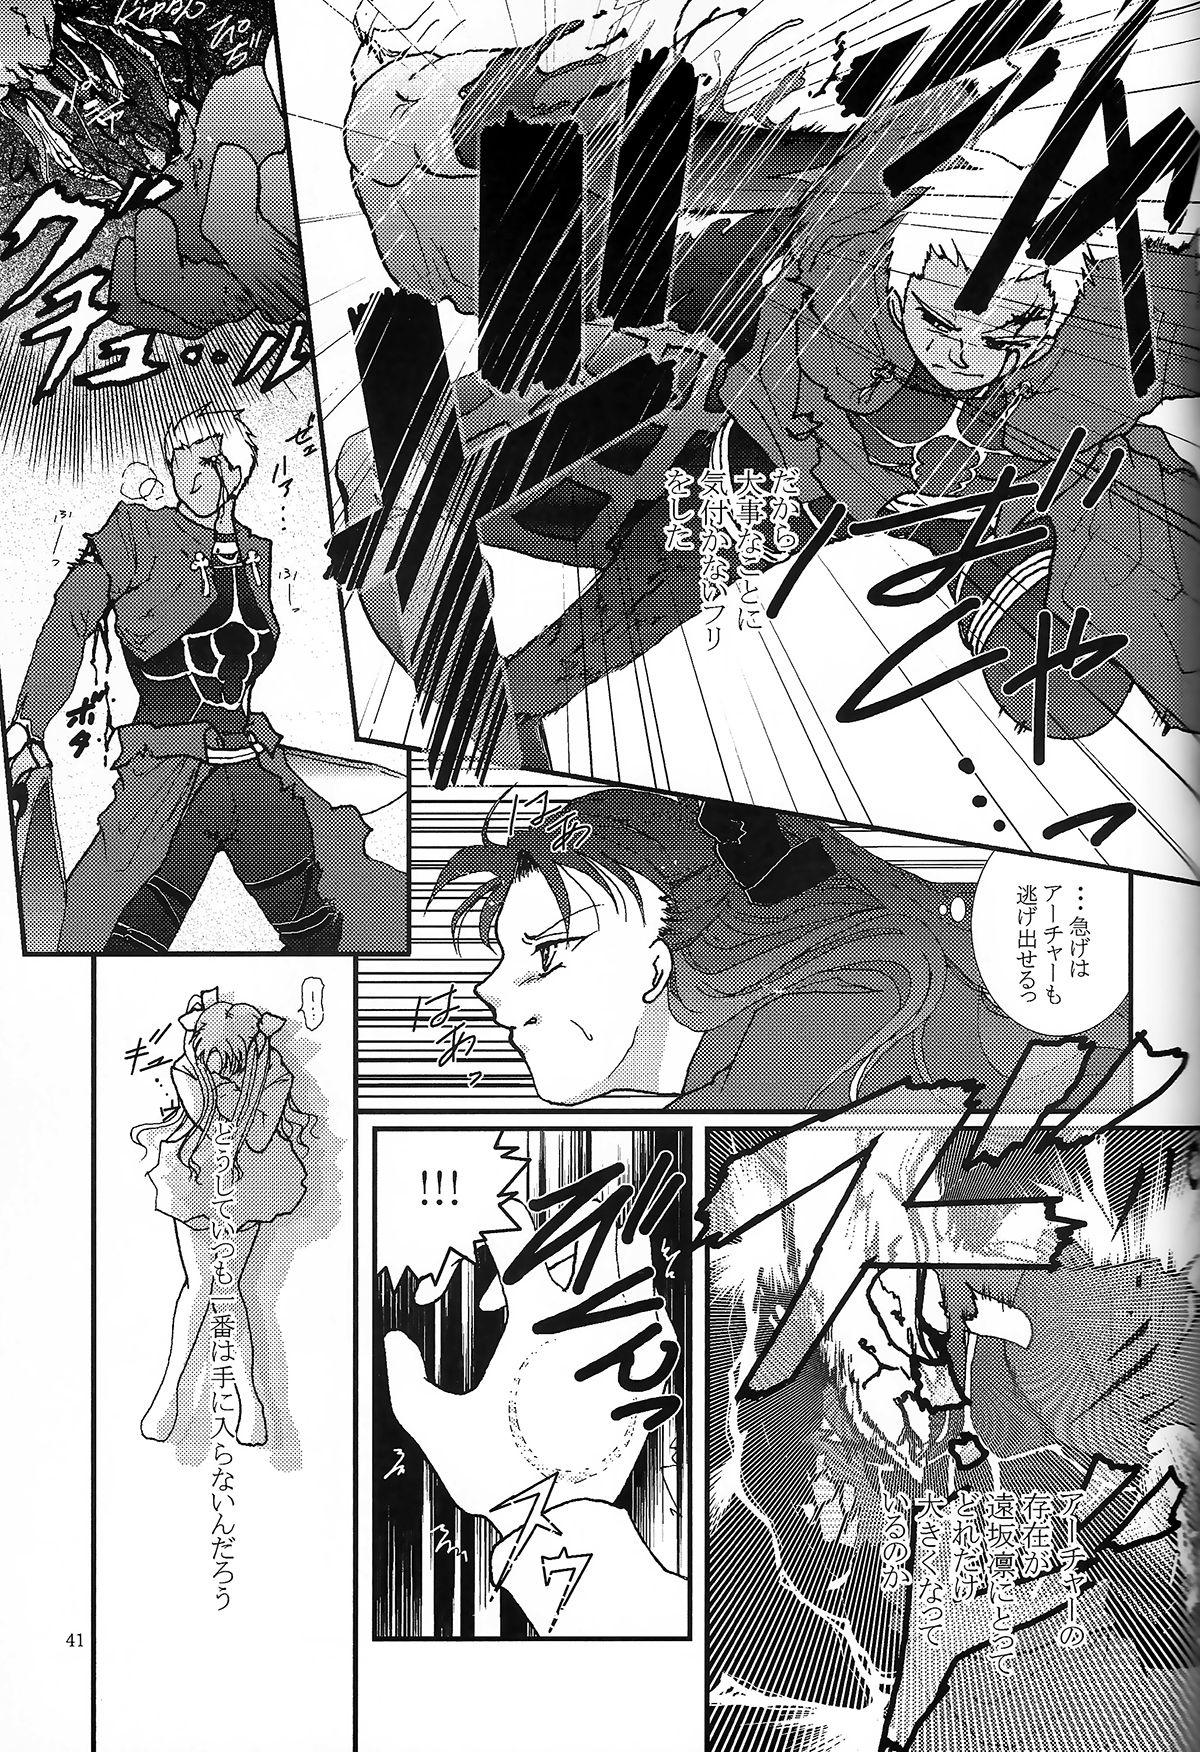 (SC24) [Takeda Syouten (Takeda Sora)] Question-7 (Fate/stay night) page 39 full